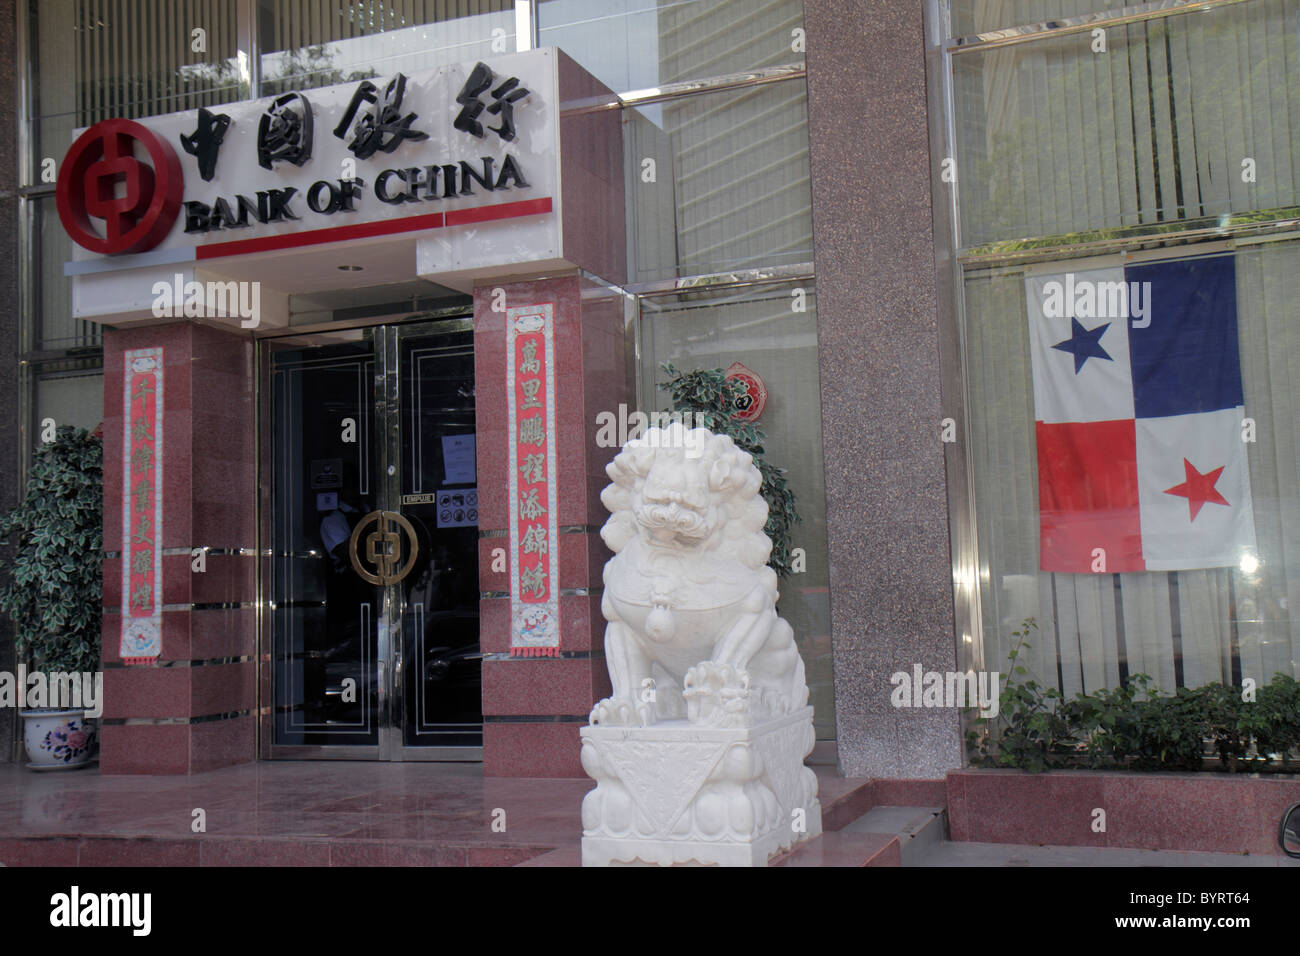 Panama,Latin,Central America,Panama City,Area Bancaria,district,Bank of China,entrance,front,sculpture,lion,Chinese characters,sign,logo,North Pana101 Stock Photo